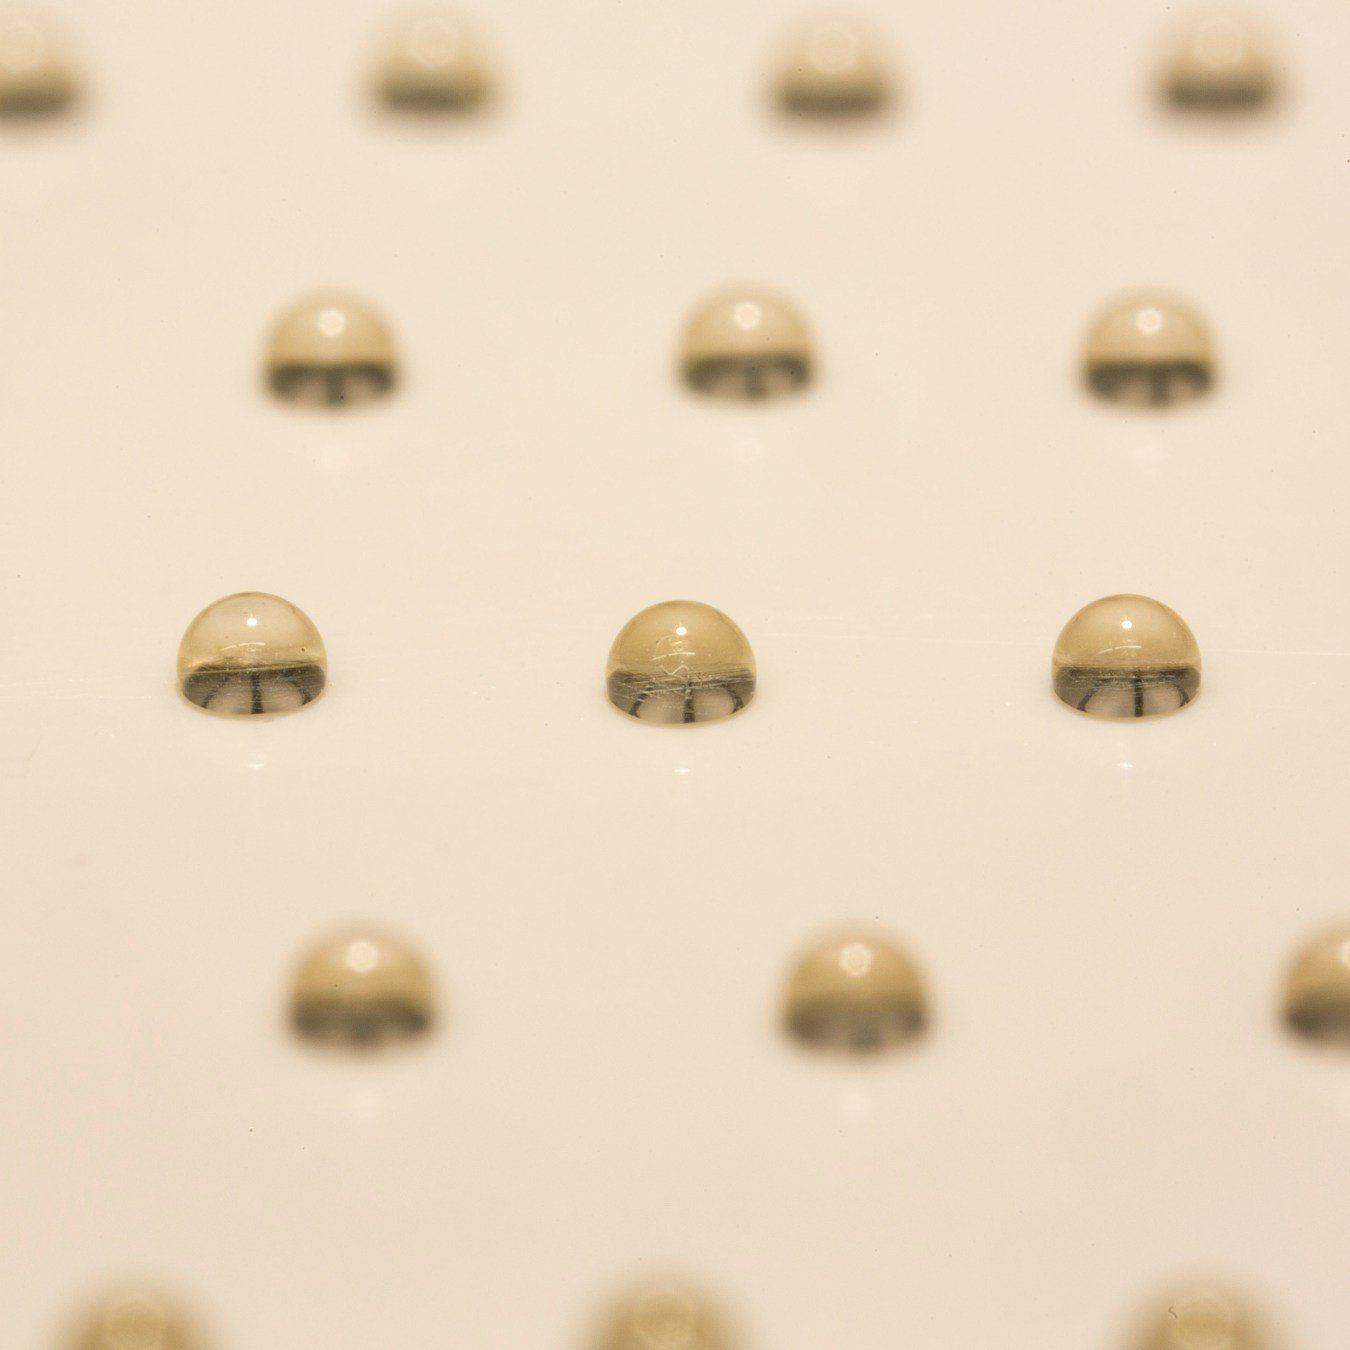 By controlling the target position, the ejected droplets can be carefully deposited and patterned anywhere. In this example, honey drops are patterned on a glass substrate